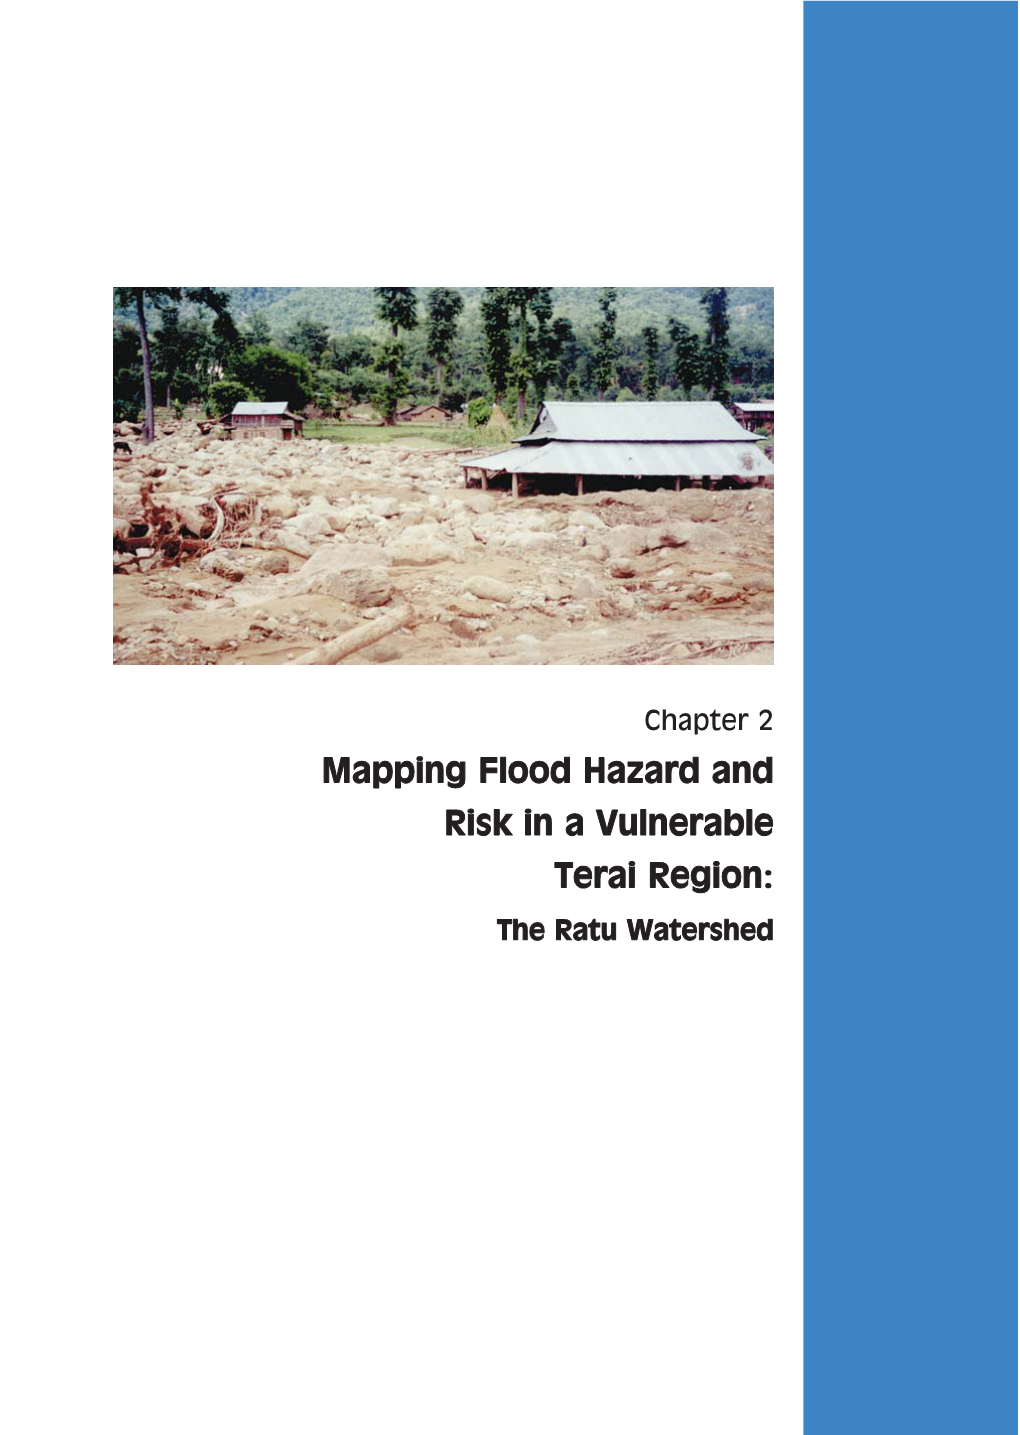 Mapping Flood Hazard and Risk in a Vulnerable Terai Region